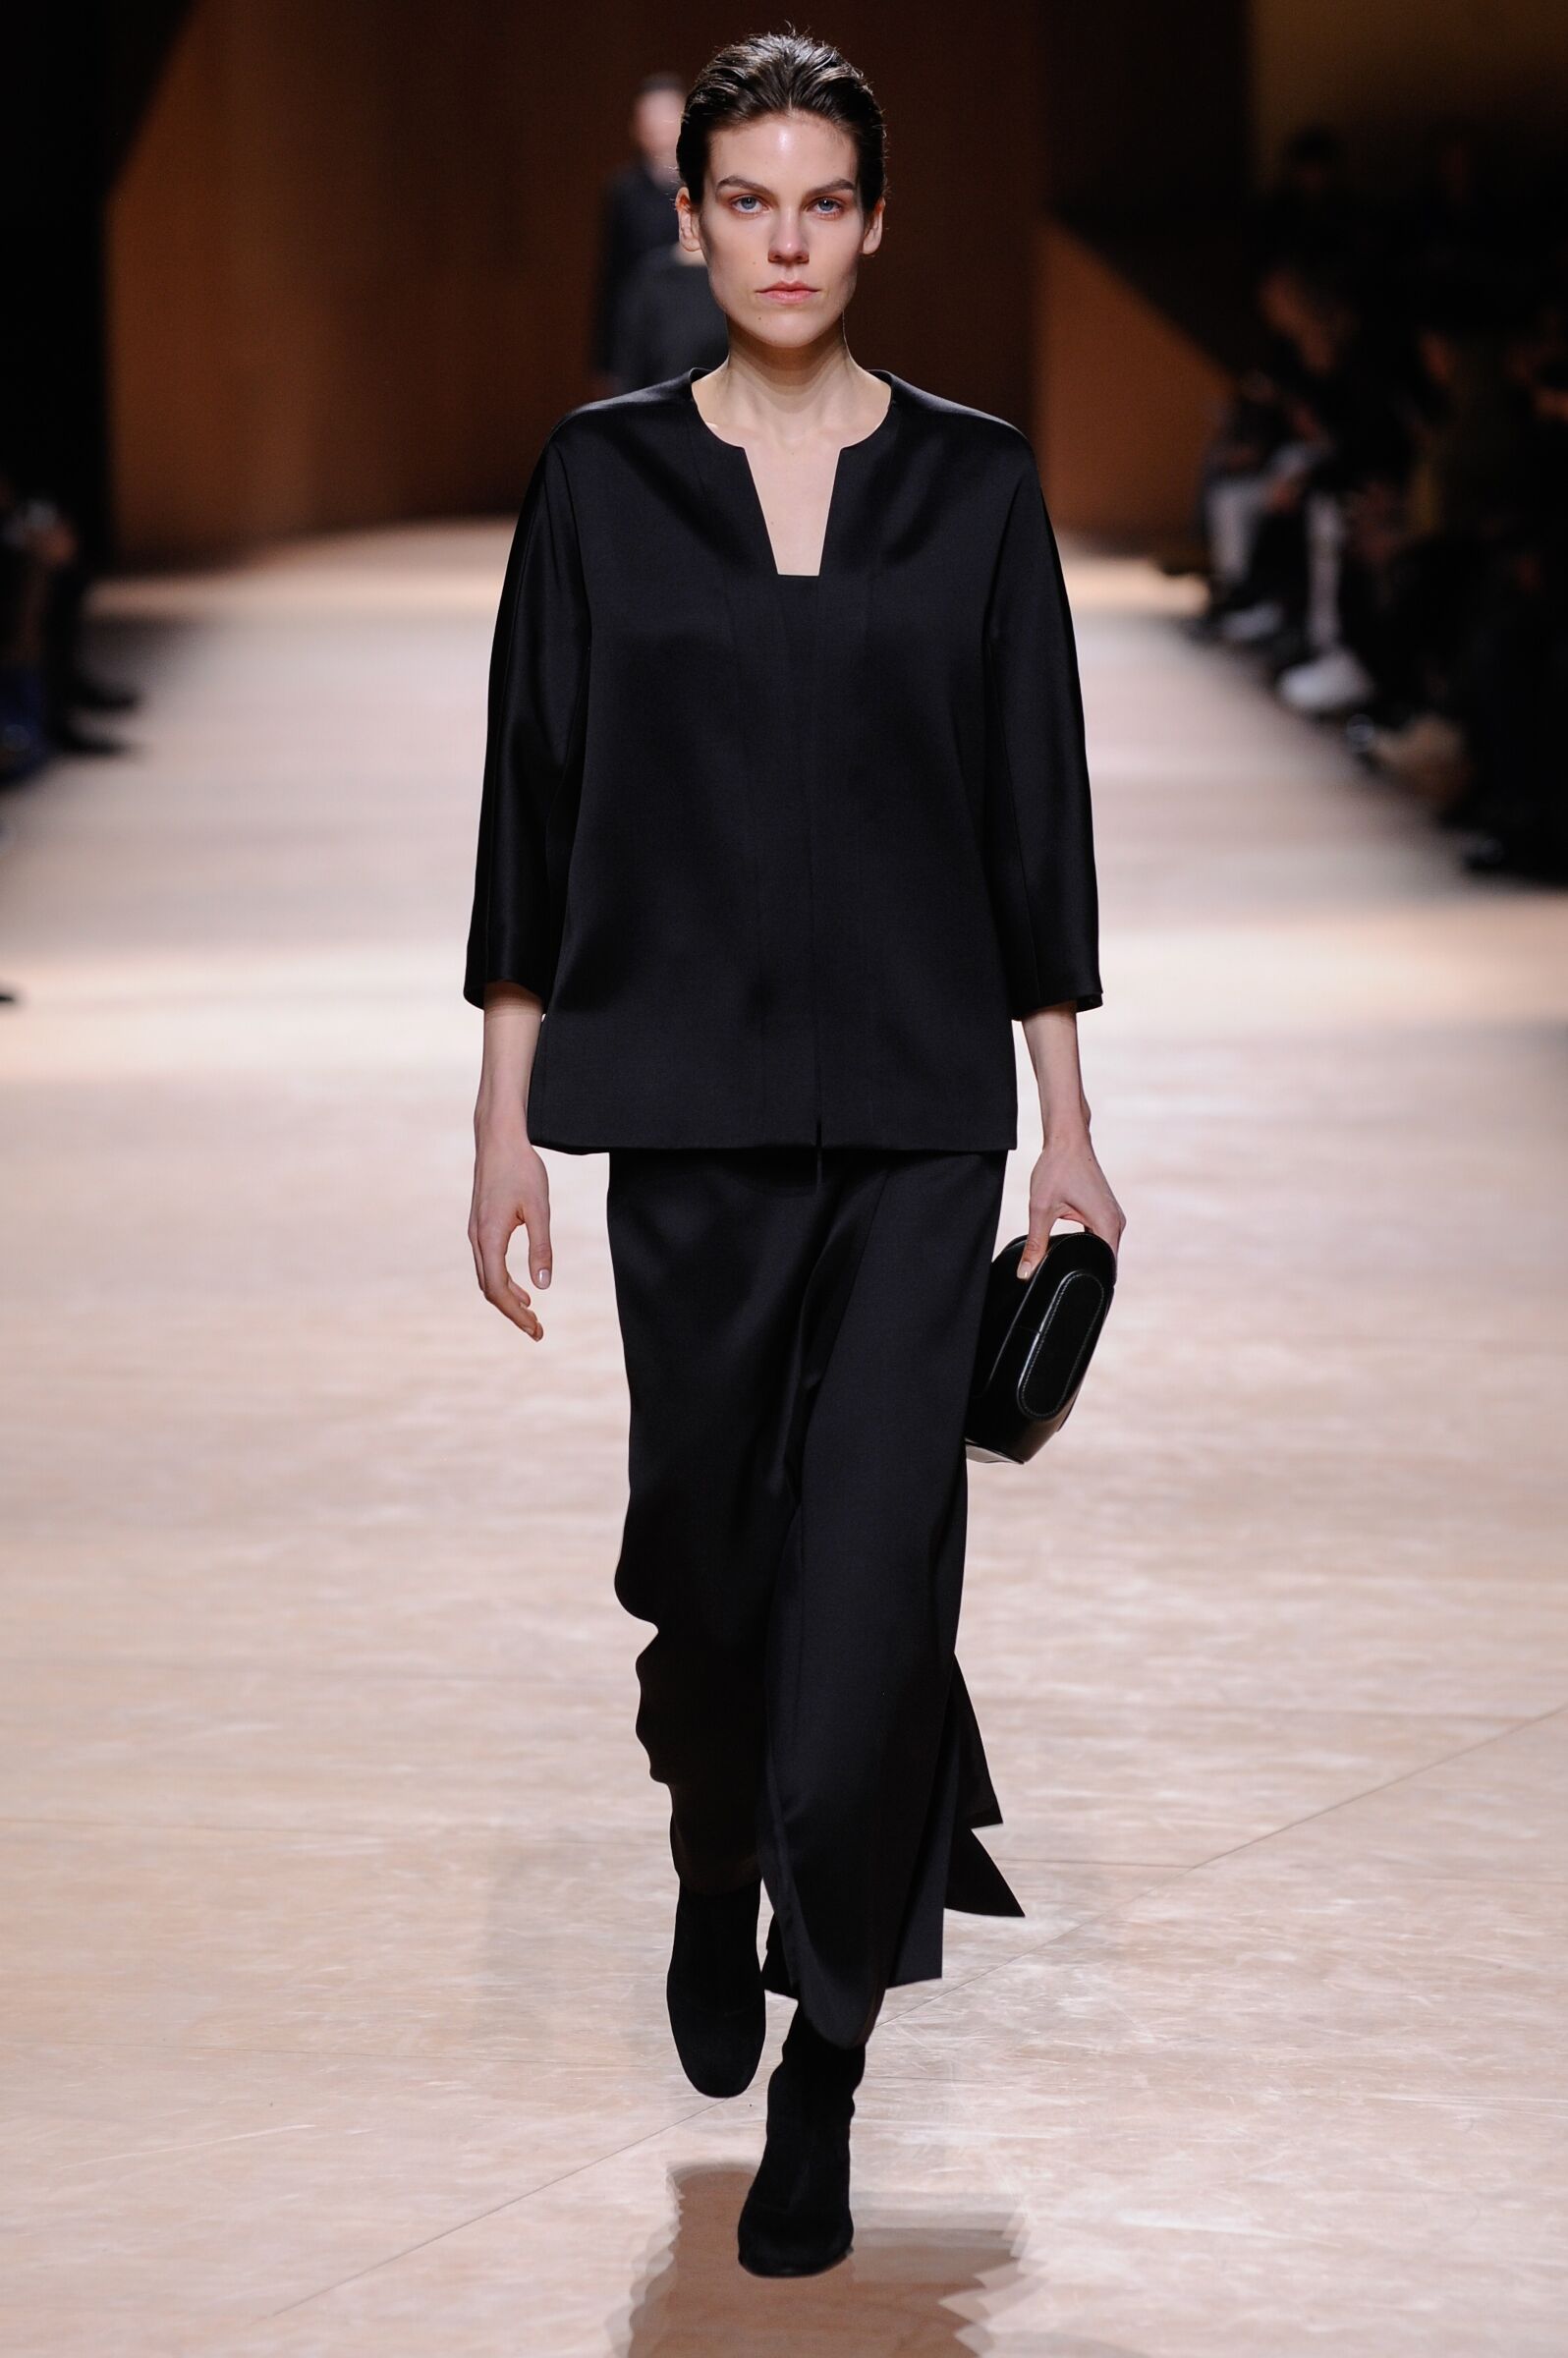 HERMÈS FALL WINTER 2015-16 WOMEN’S COLLECTION | The Skinny Beep